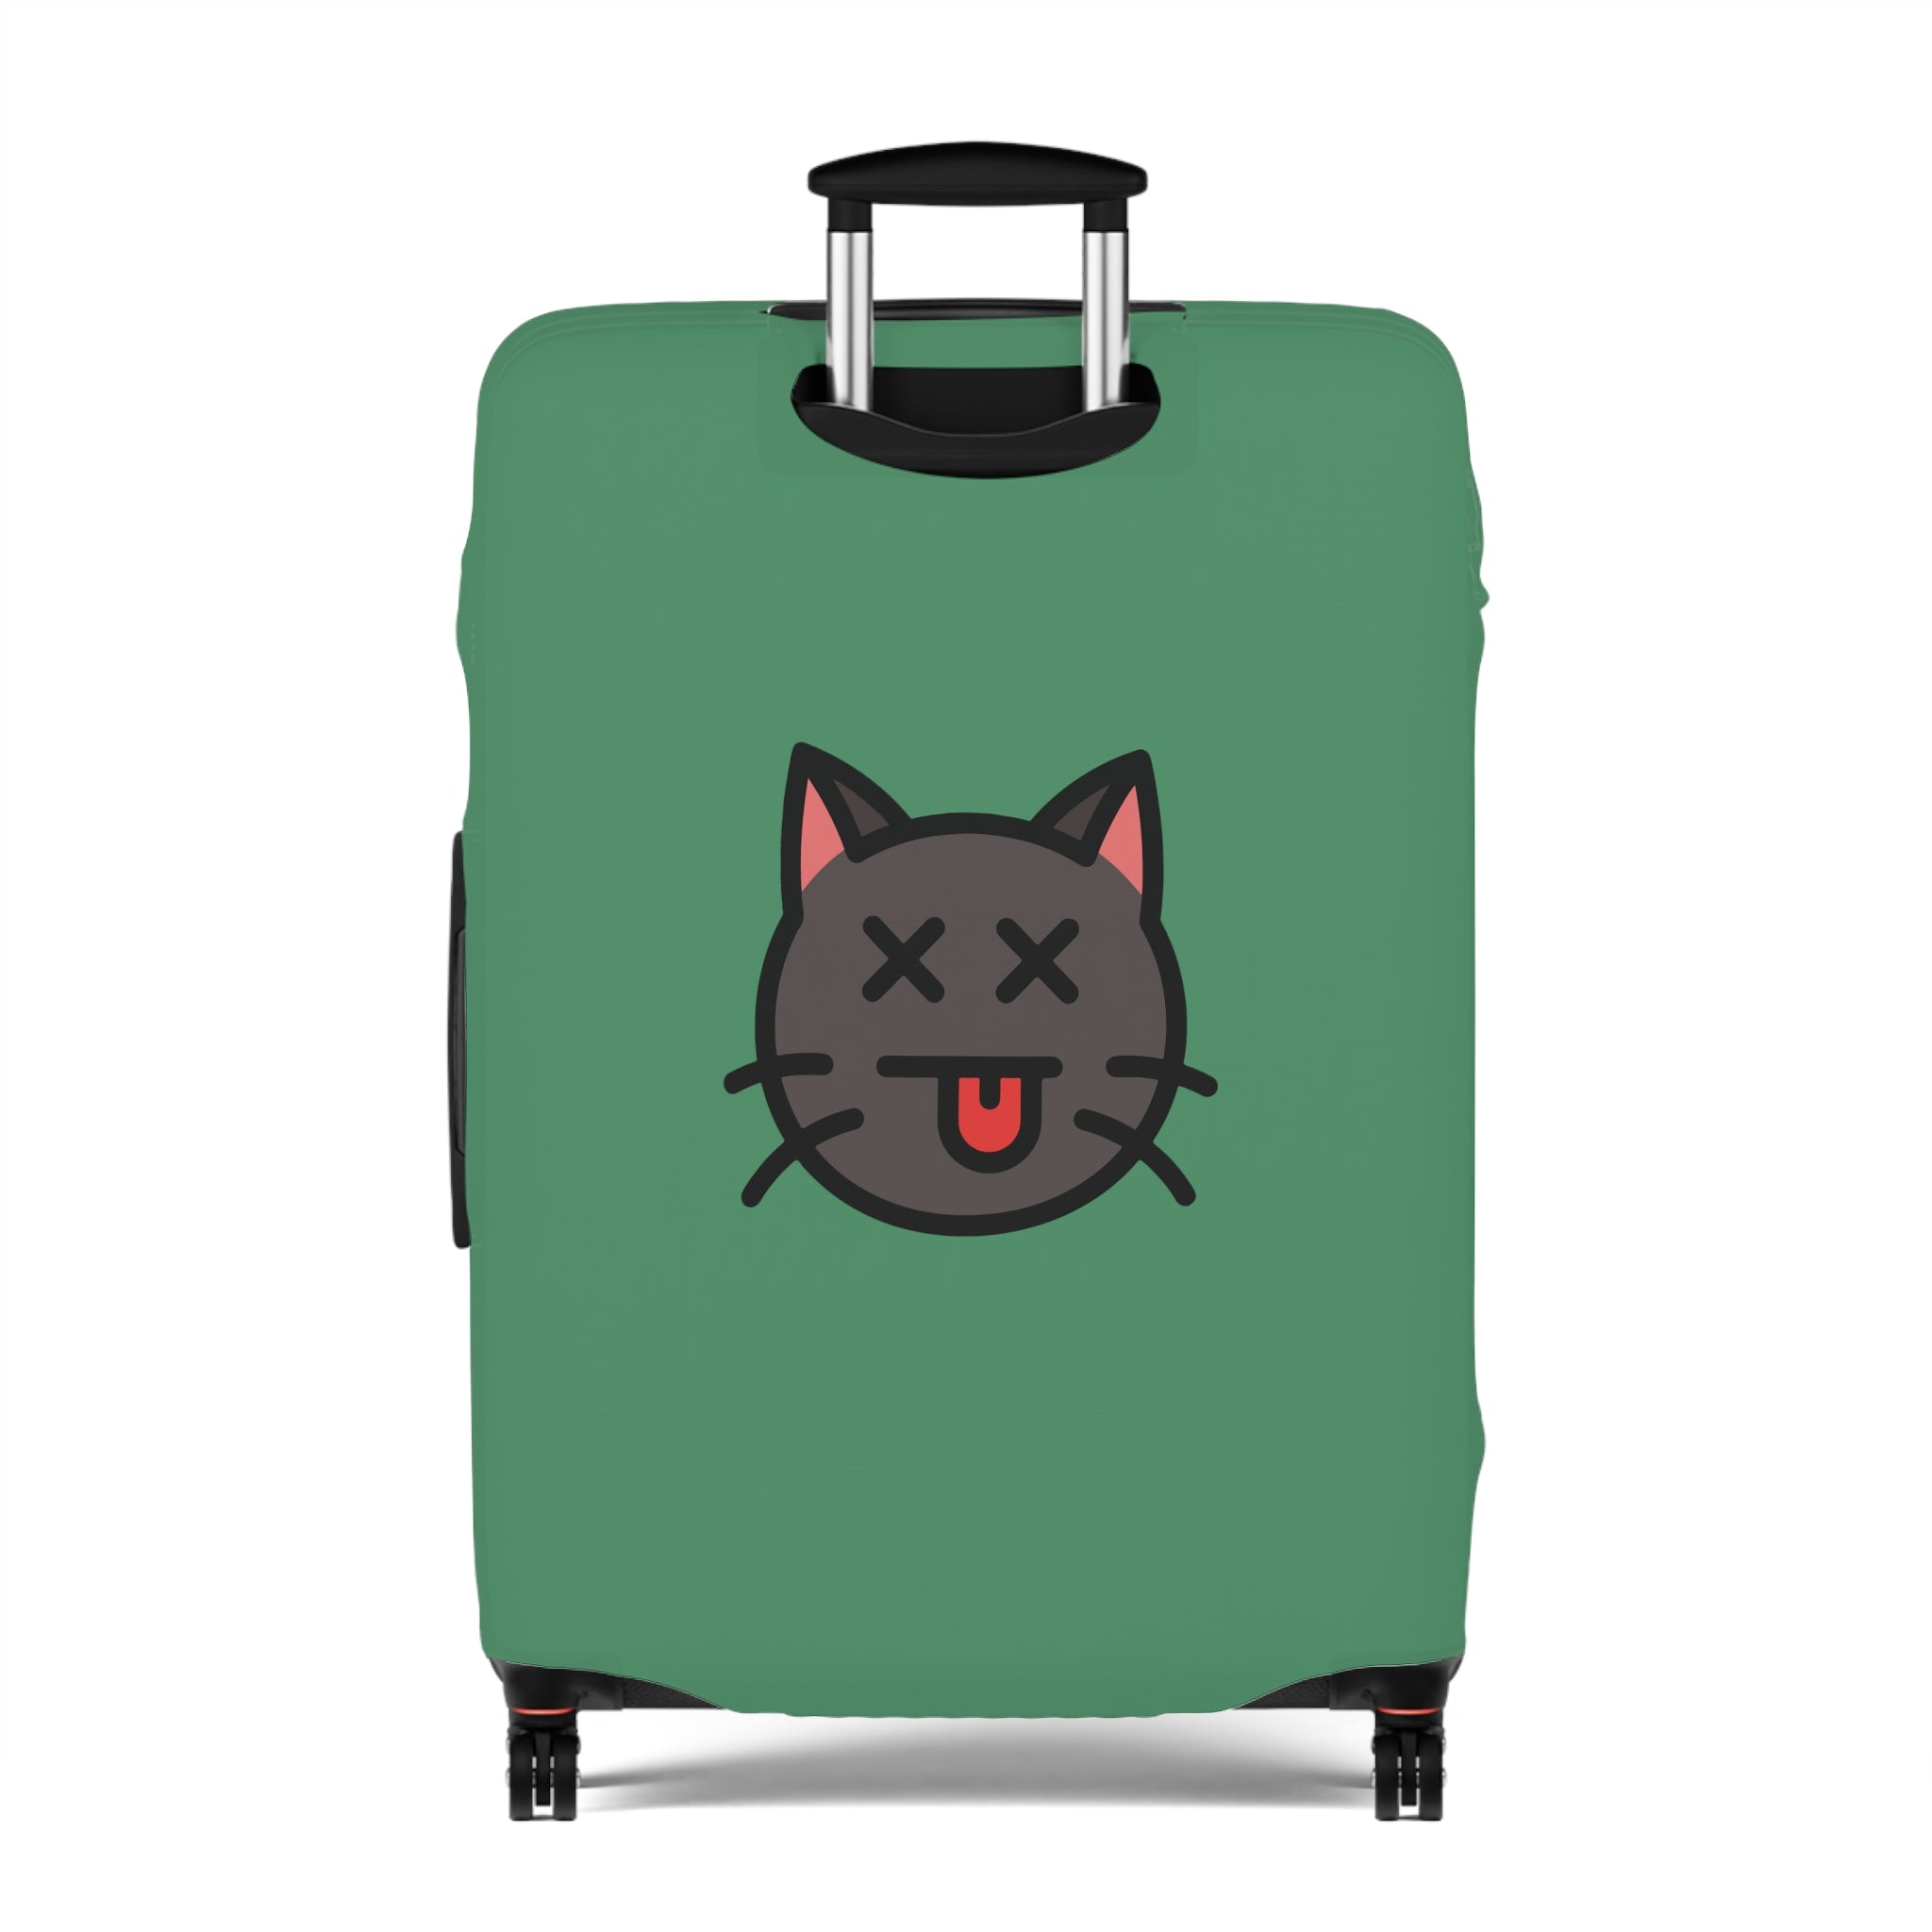 Emotional baggage Luggage Cover (Green)